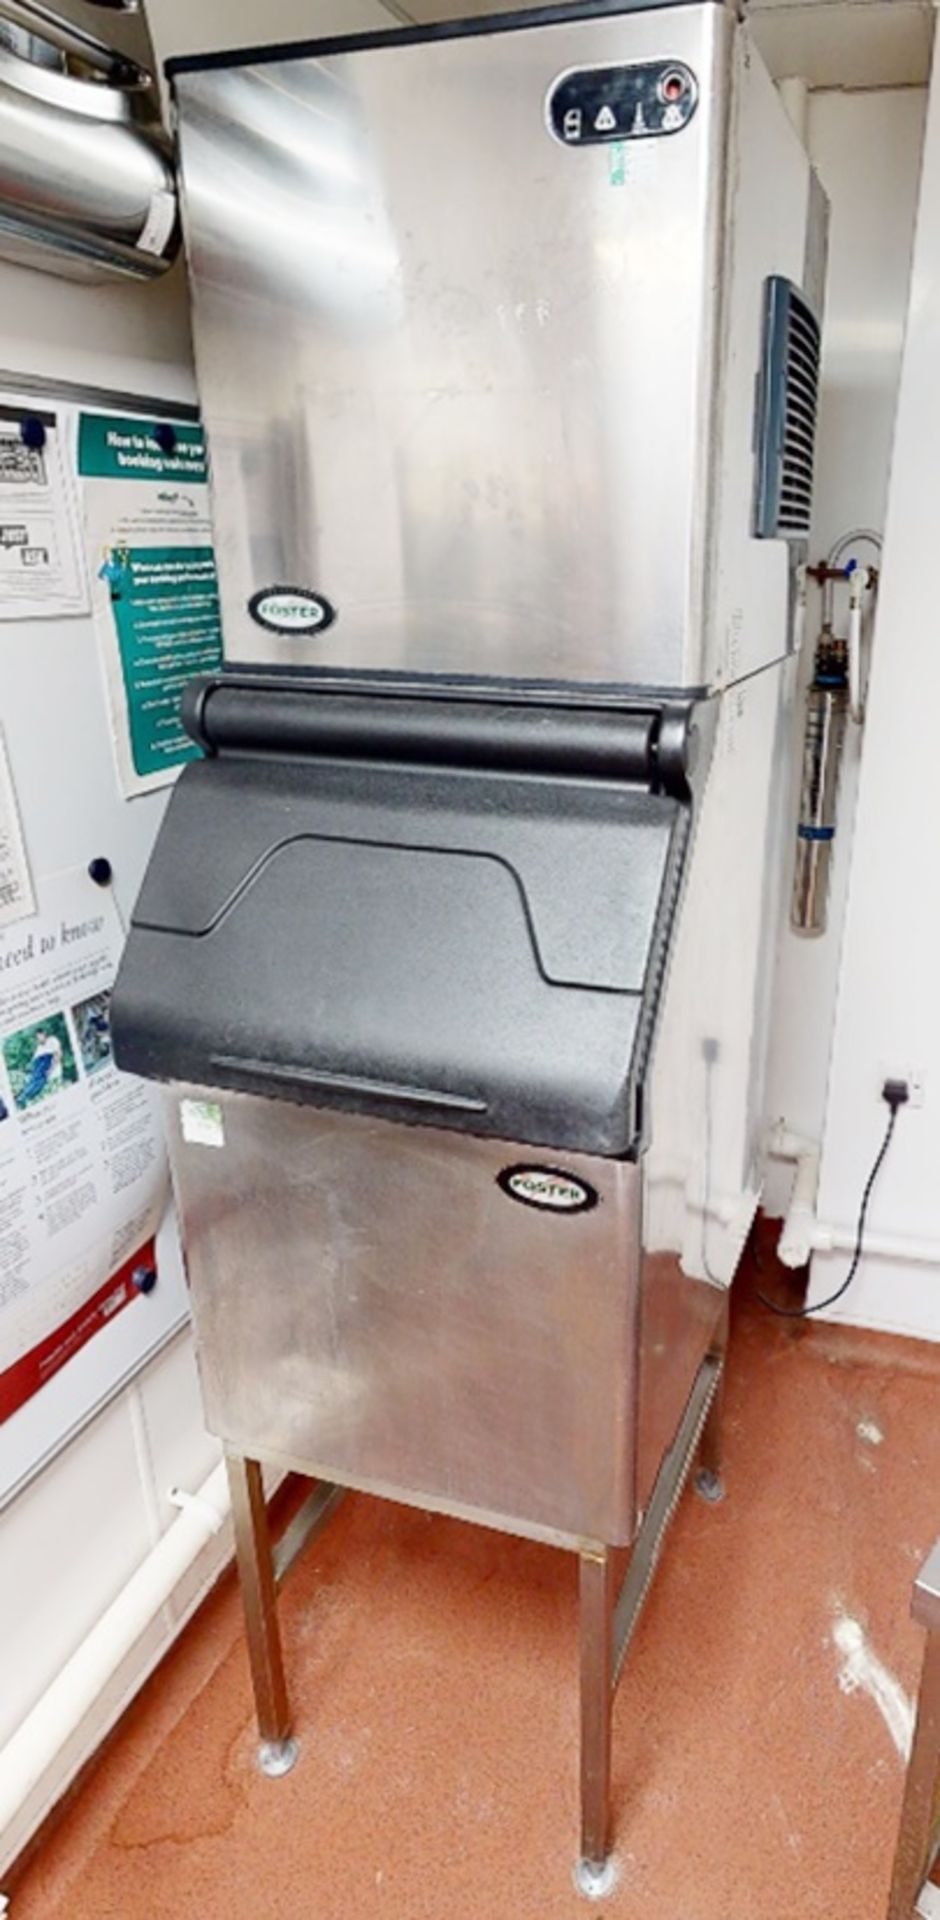 1 x Fosters Commercial Ice Machine With Ice Bin And Stand - Stainless Steel Finish - Ref: GEN561+541